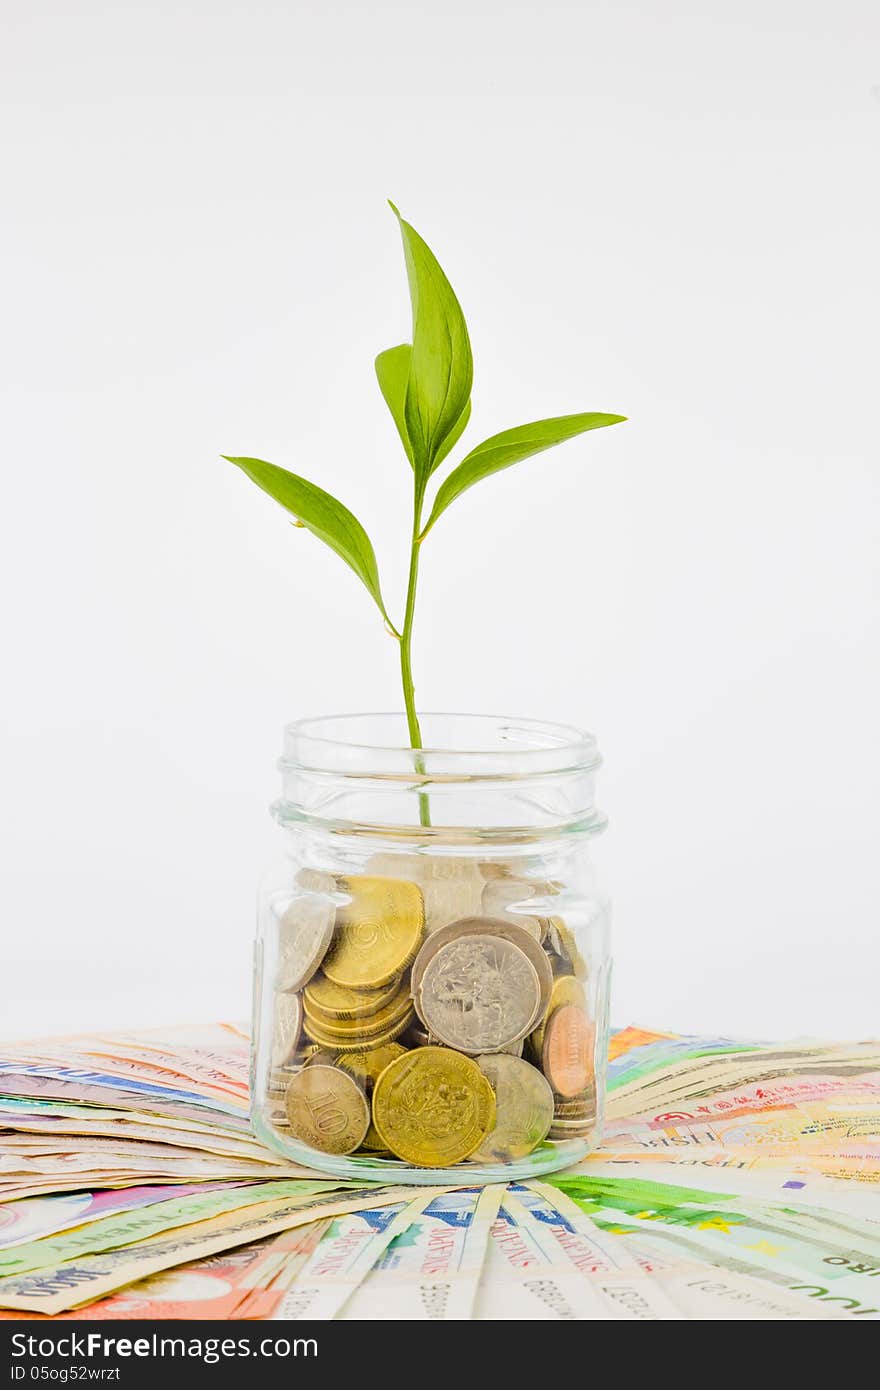 Plant and coins in glass jar, currency, investment and business concepts